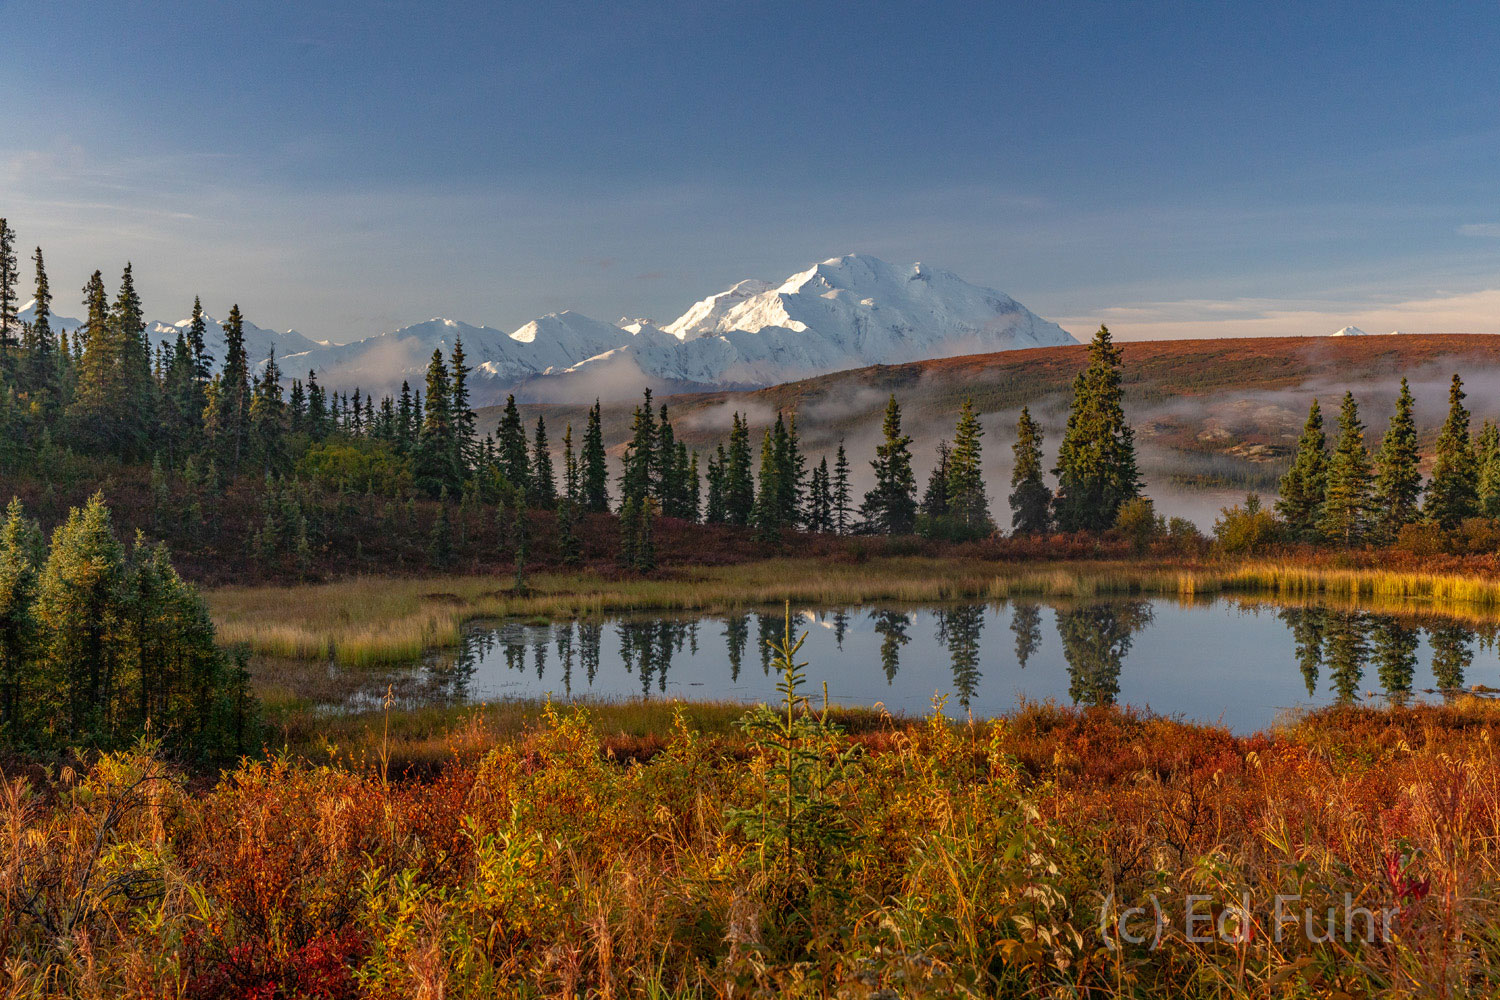 From the steps of the lodge at Camp Denali lies exquisite Nugget Pond and one of the best views of Denali